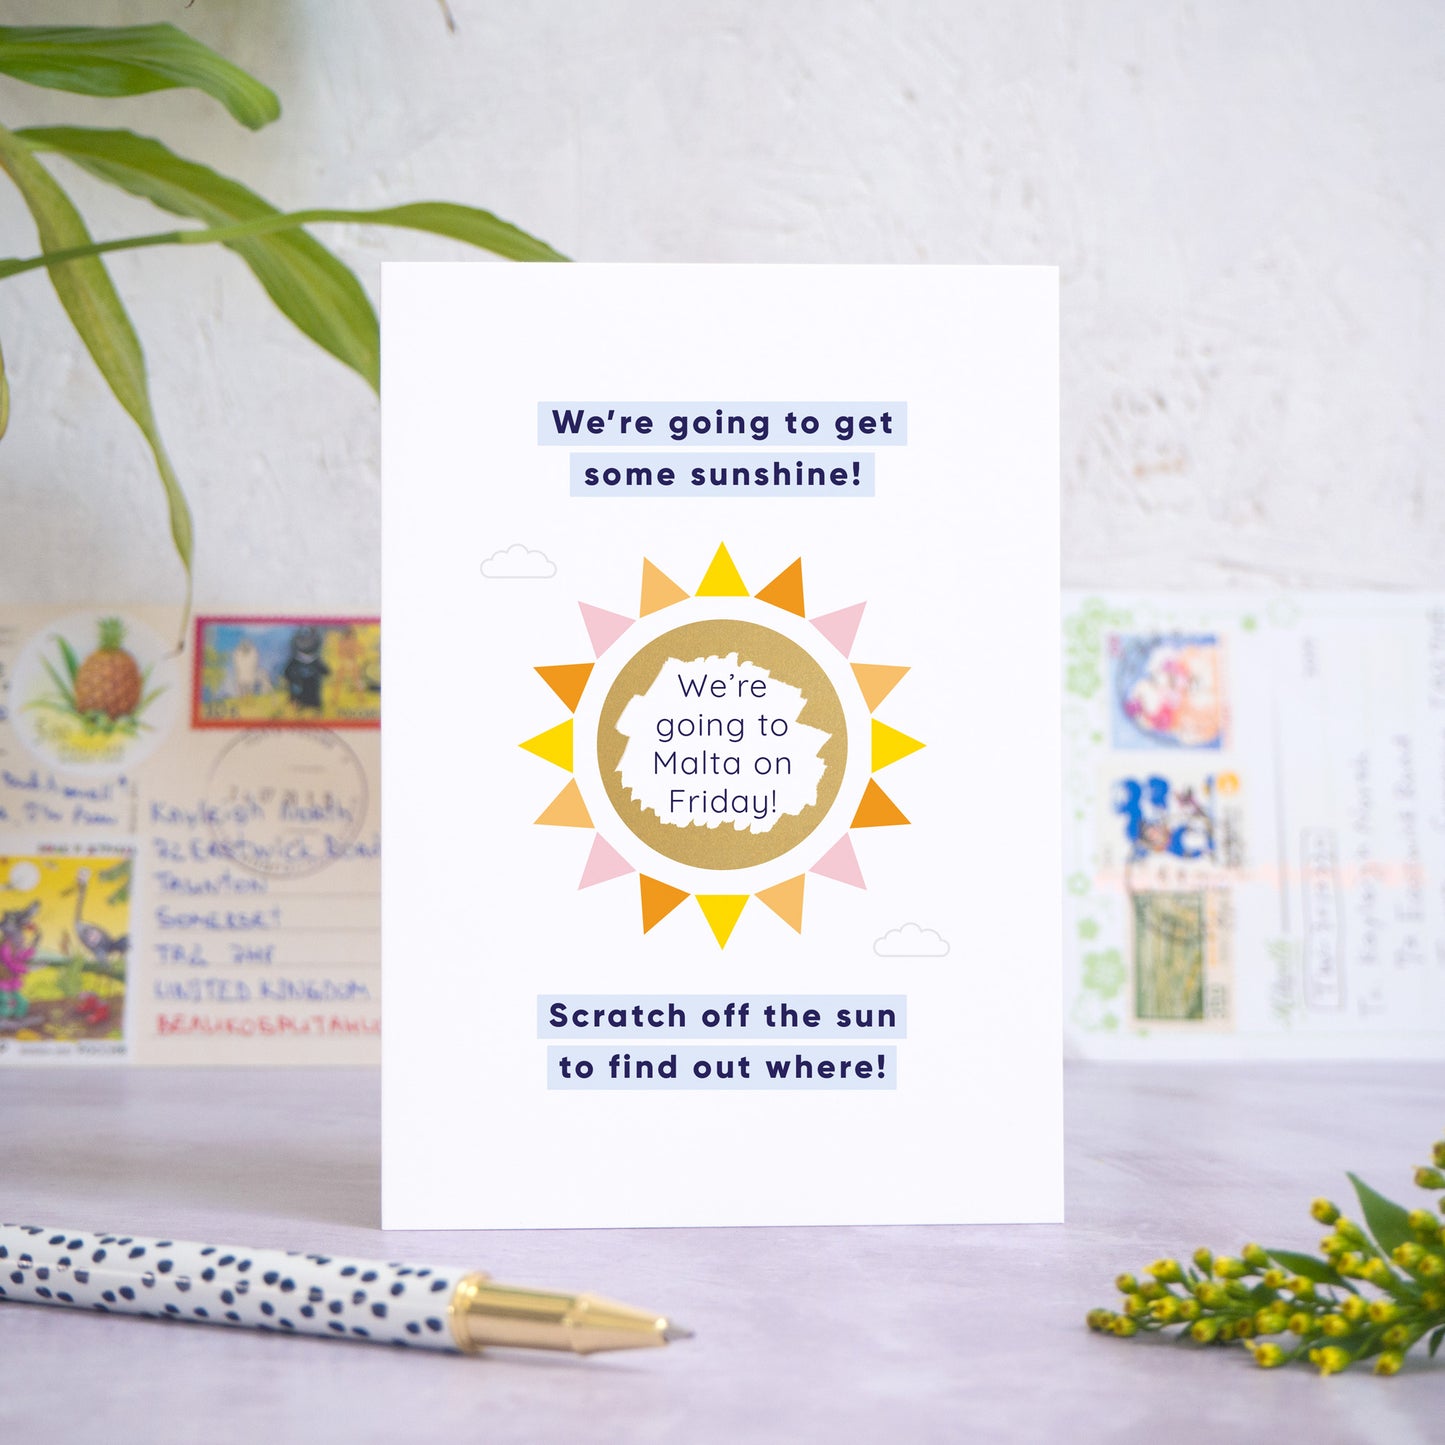 A holiday reveal scratch card featuring a shiny gold sun. The gold panel has been scratched off to reveal the holiday destination. The text reads: “We're going to get some sunshine! Scratch off the sun to find out where!”. The card is standing on a grey surface with postcards in the background and a pen and foliage in the foreground.